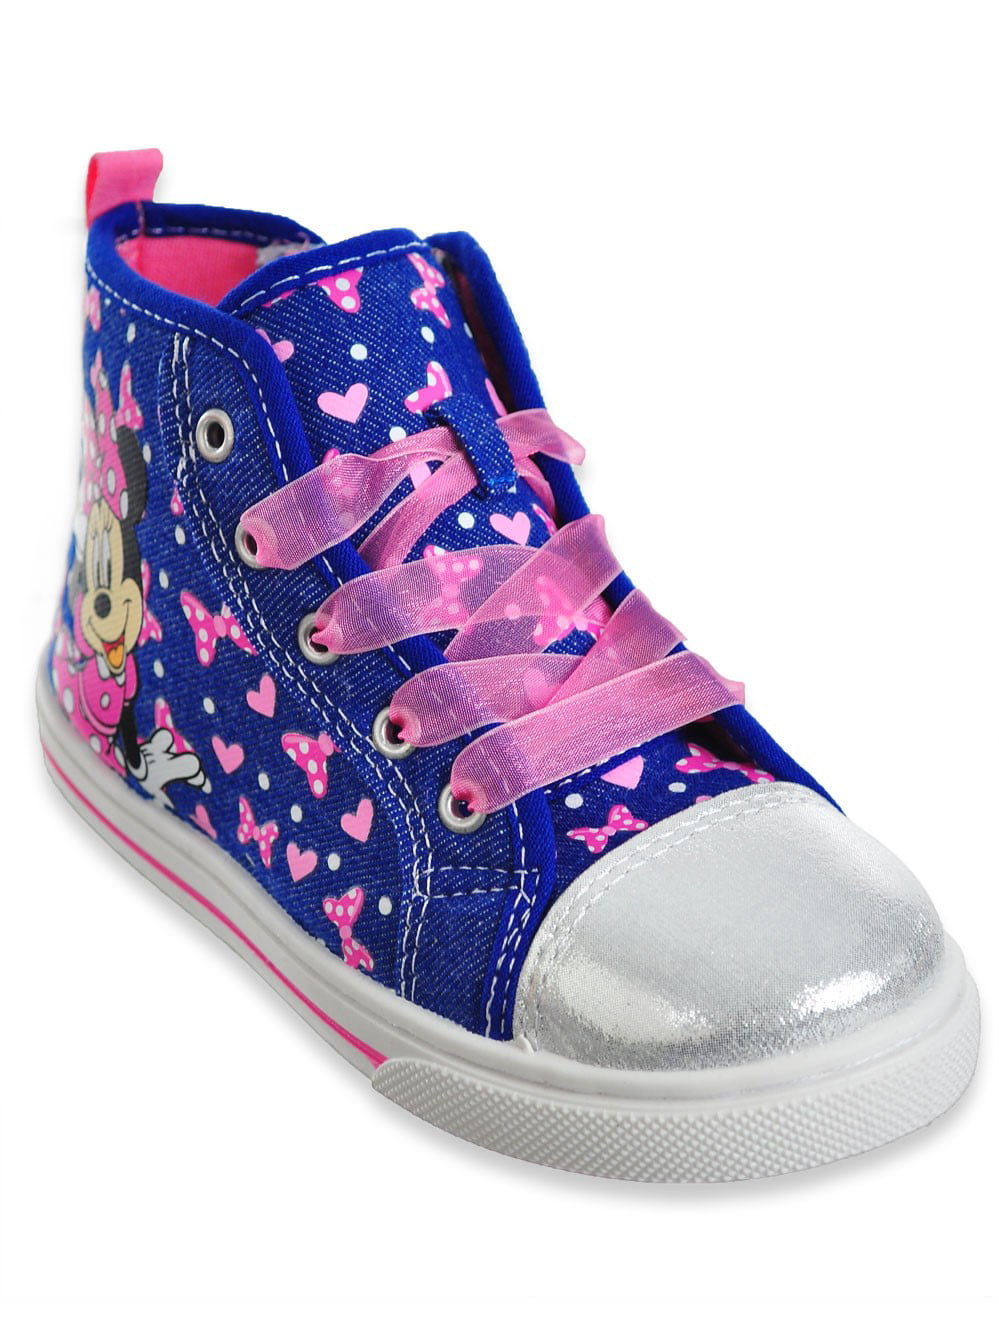 Minnie Mouse - Disney Minnie Mouse Glittery Hearts Character High-Top ...